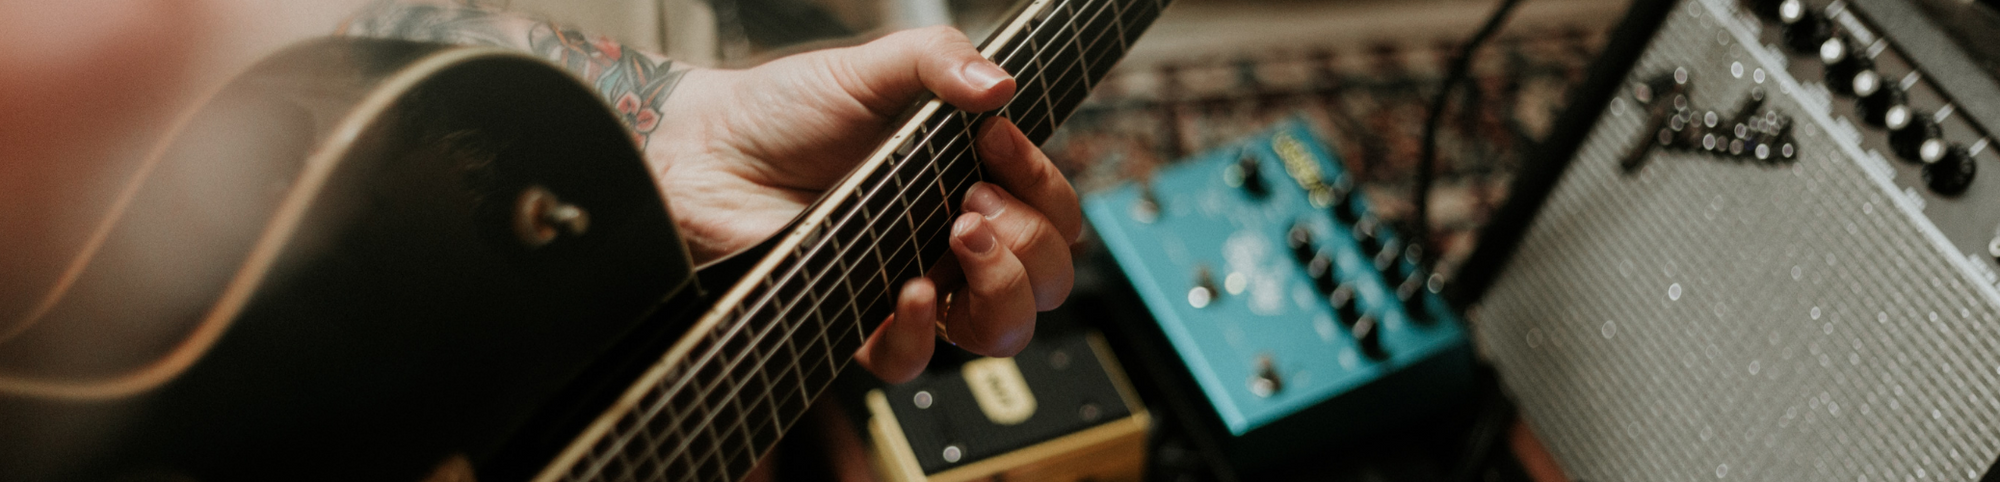 Top 5 Practice Amps for Beginners 2021-Sky Music